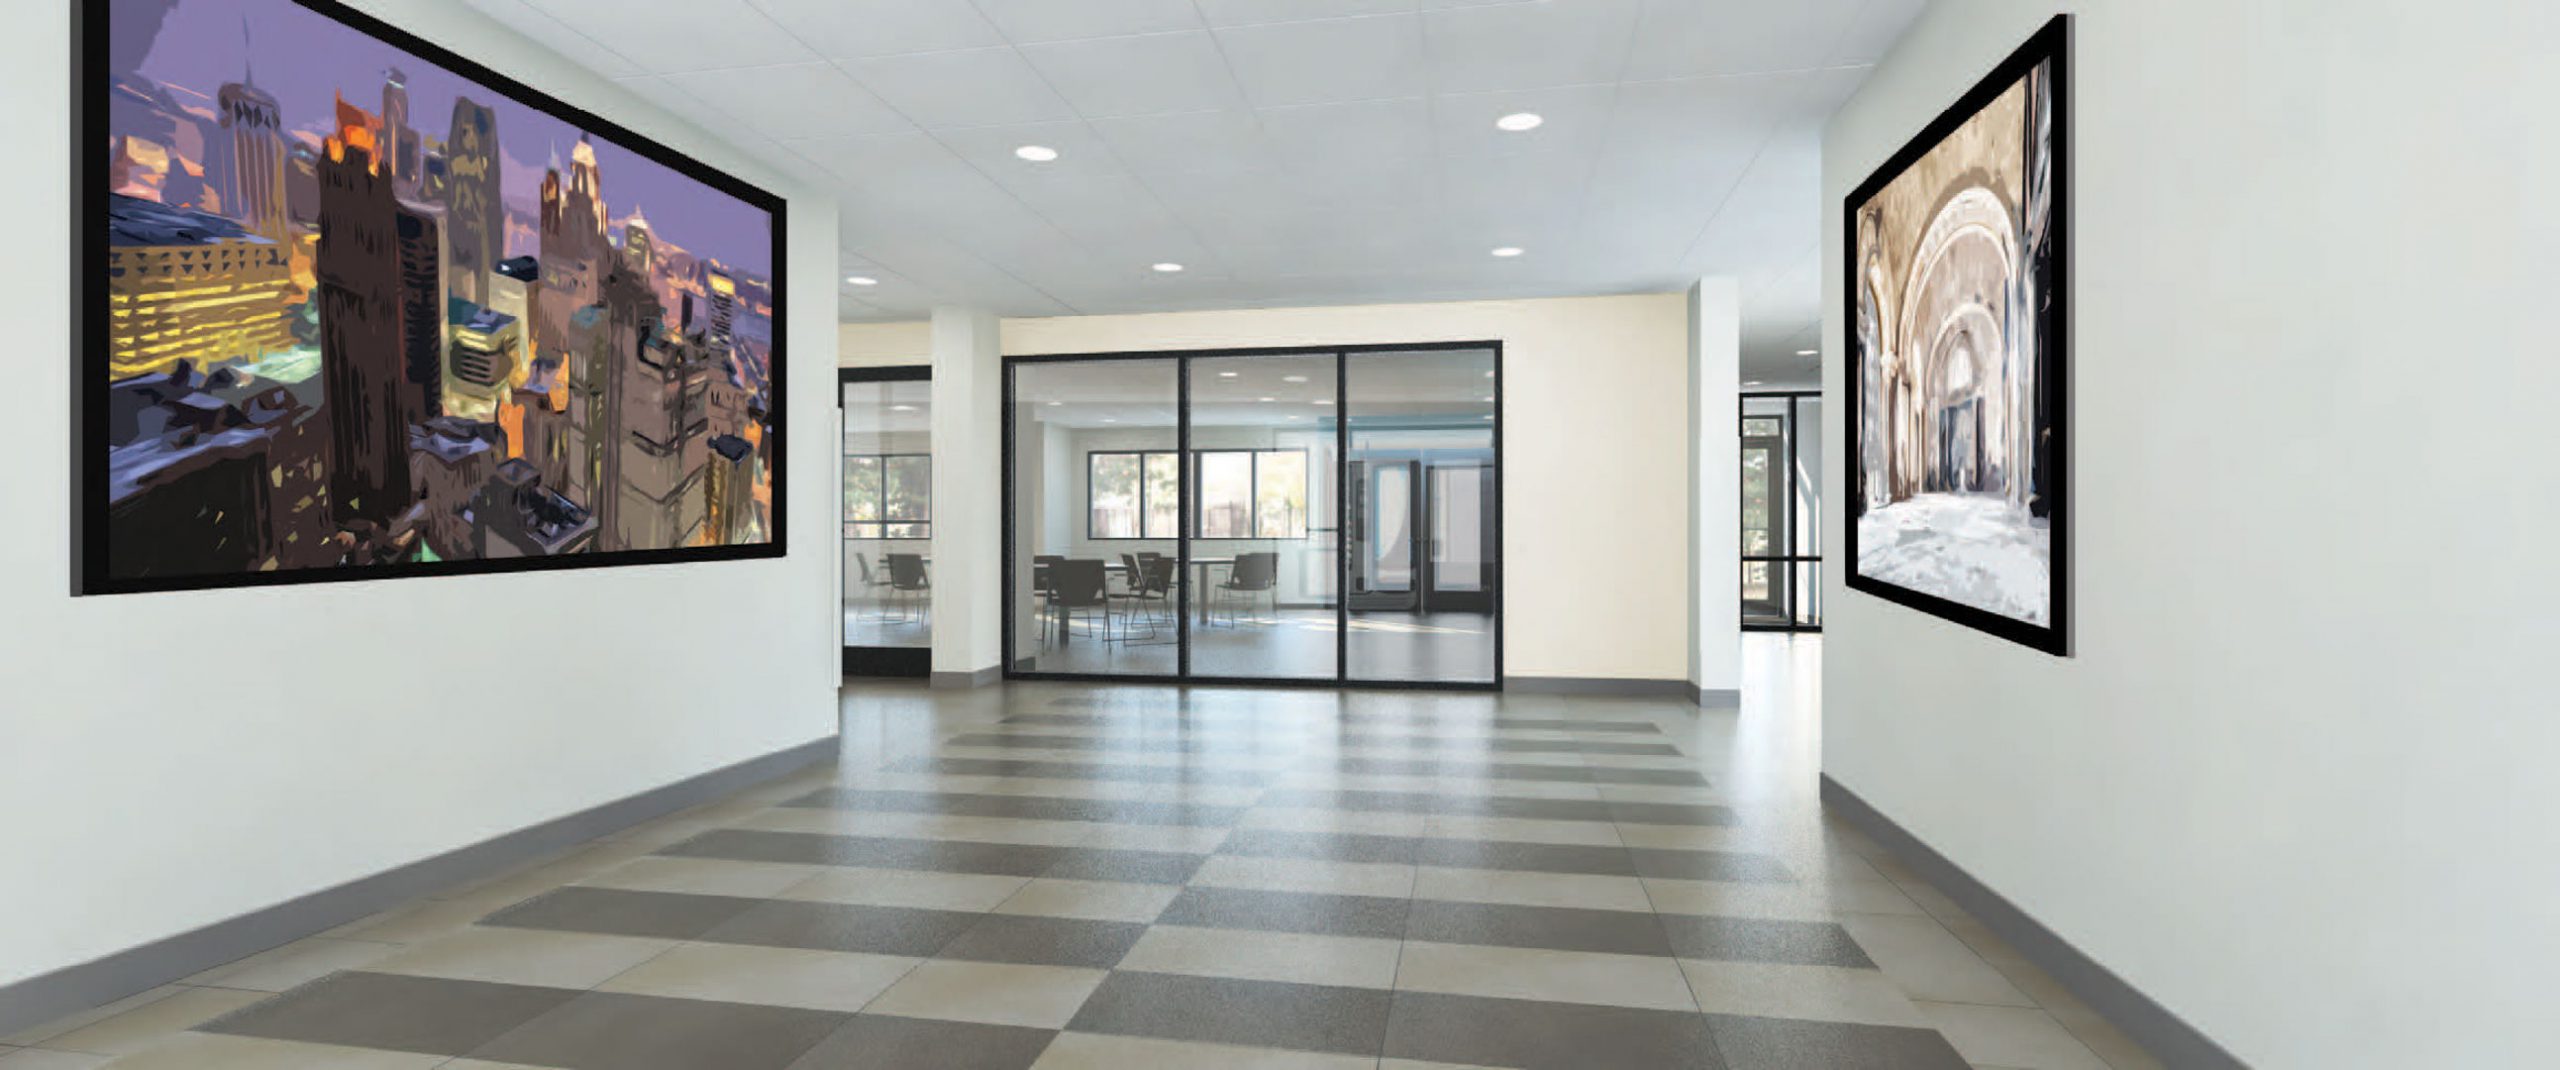 Lobby with view to glass-enclosed community room